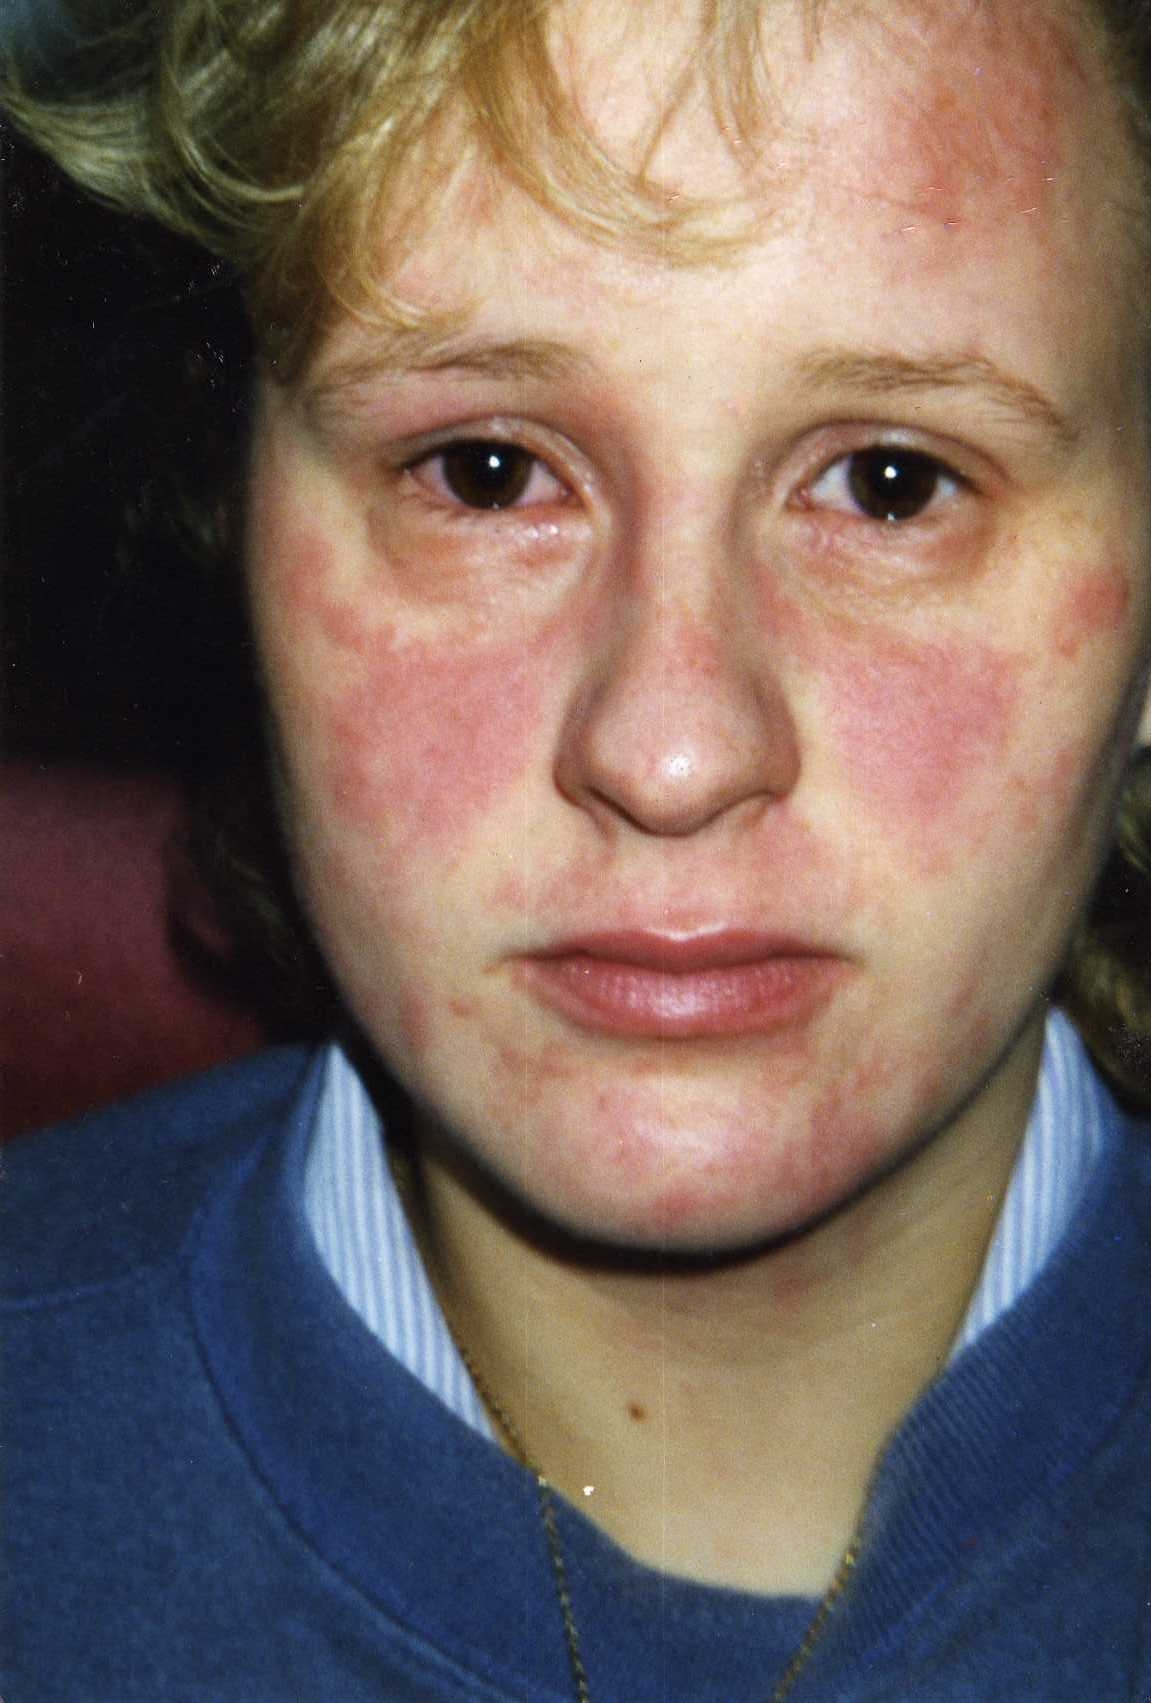 Suzanne John's eczema flared in her 20's